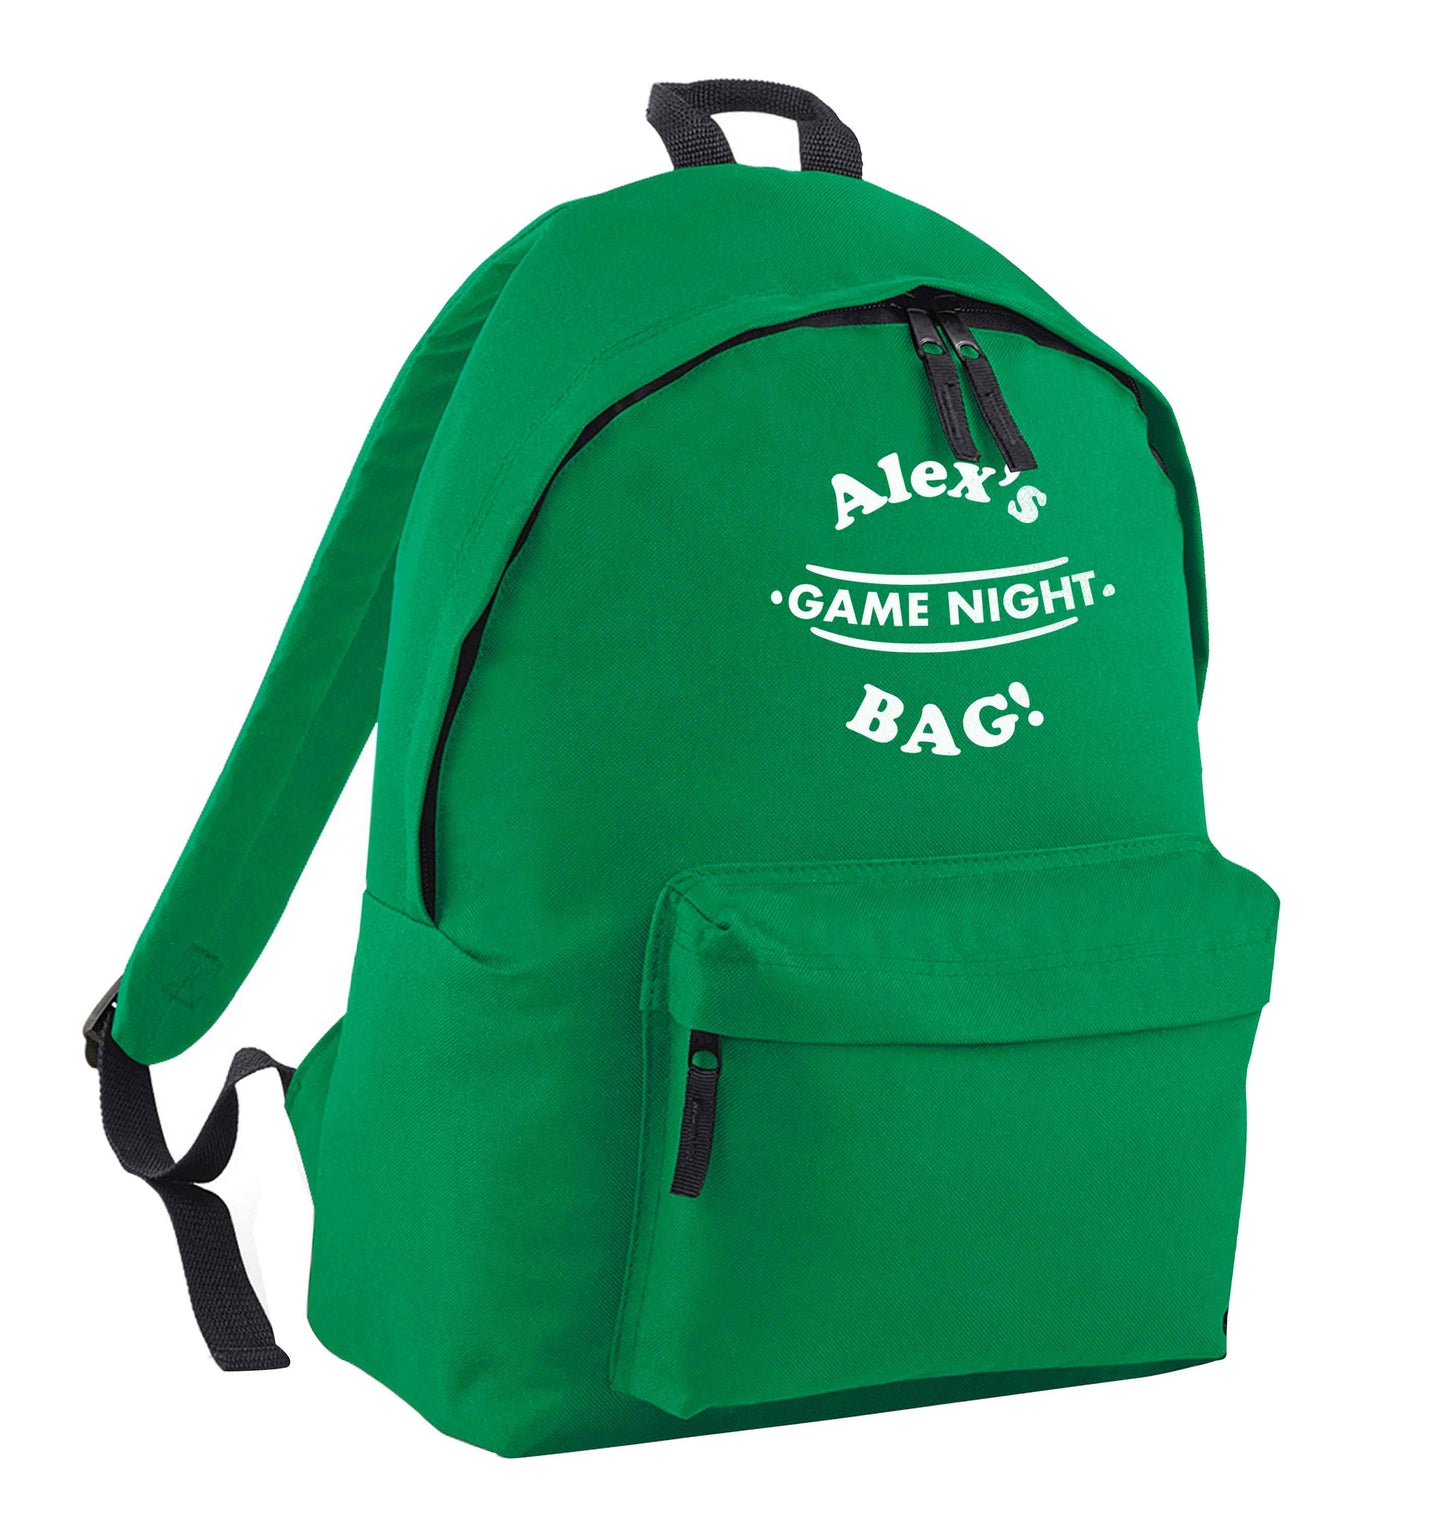 Personalised game night bag green adults backpack